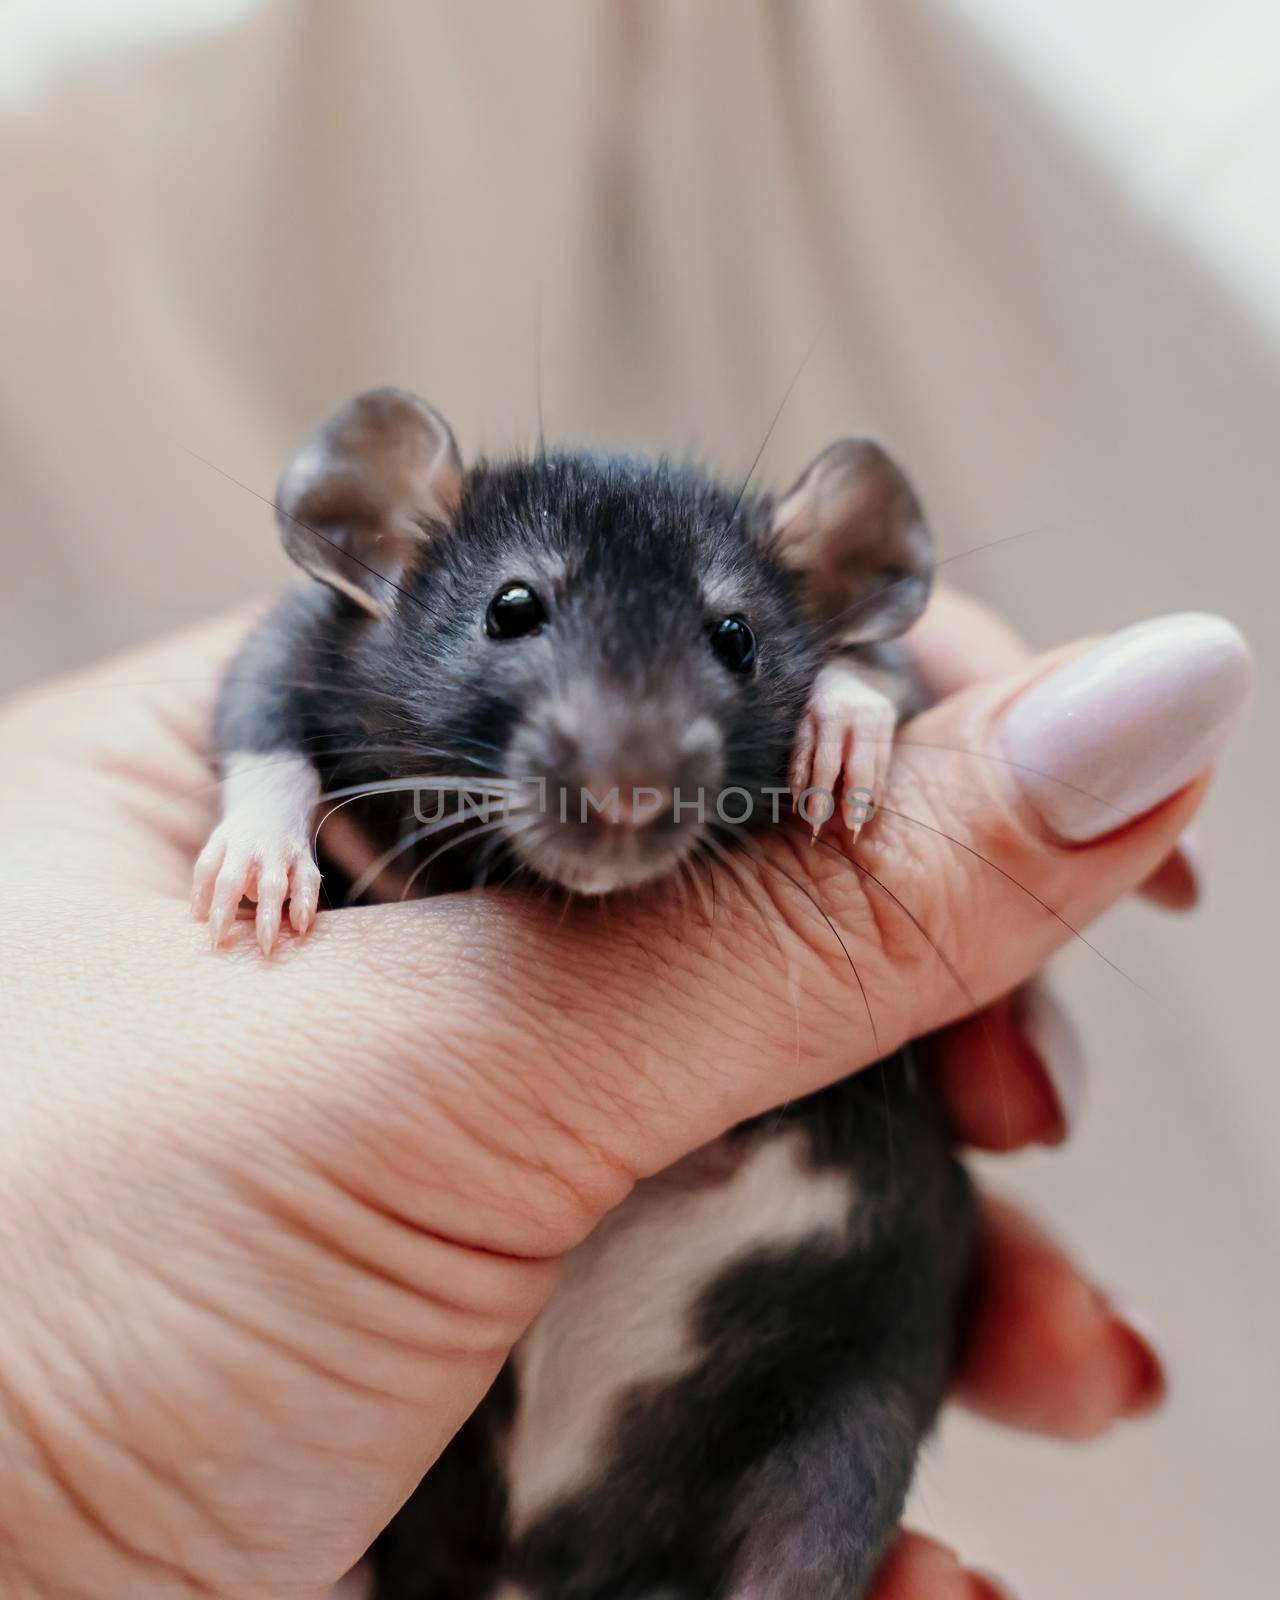 A small black rat with white spots on its belly in a female hand with a manicure. On a light background